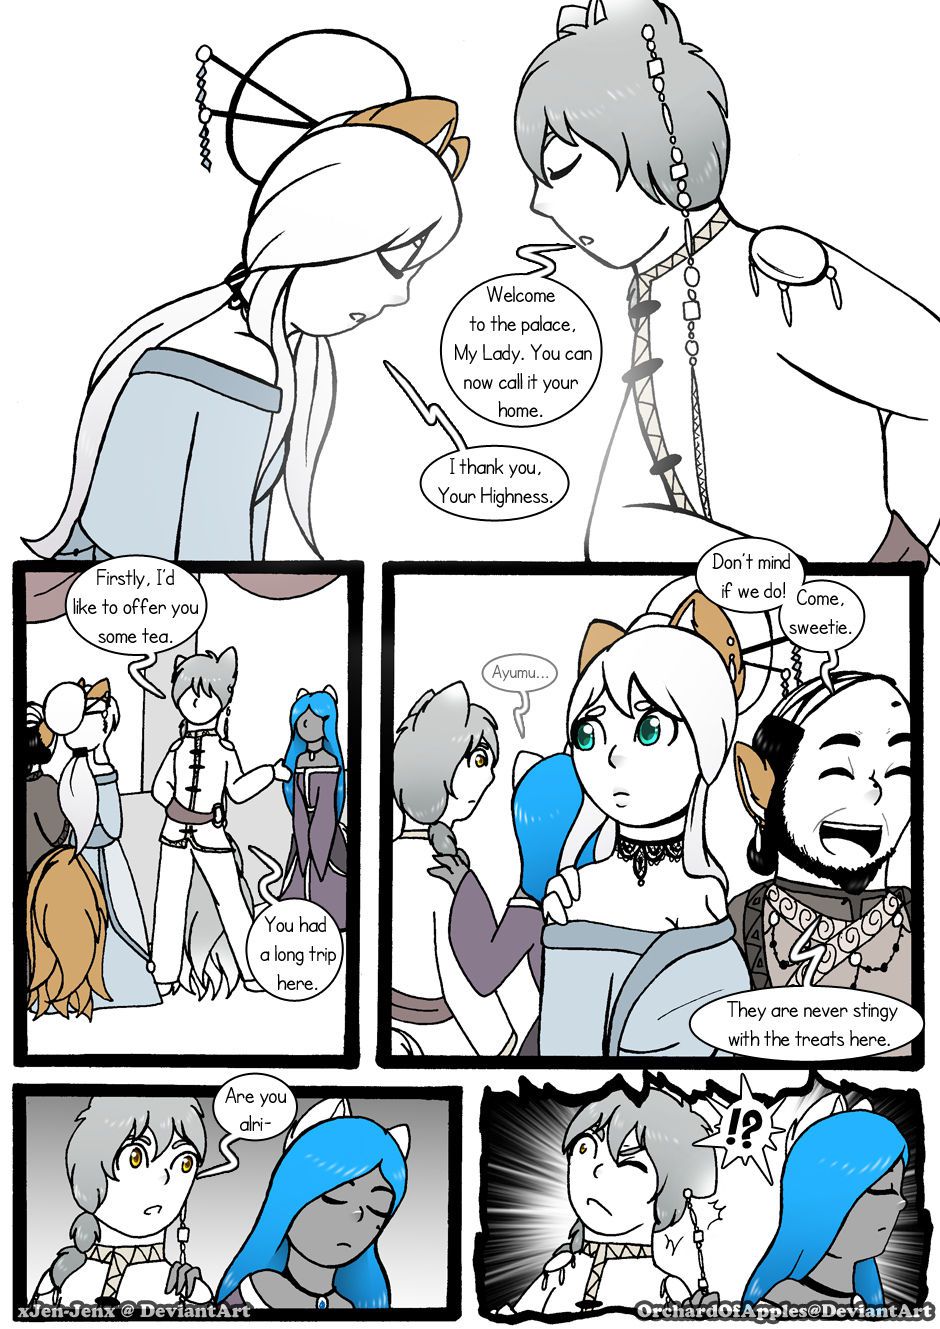 [Jeny-jen94] Between Kings and Queens [Ongoing] 197